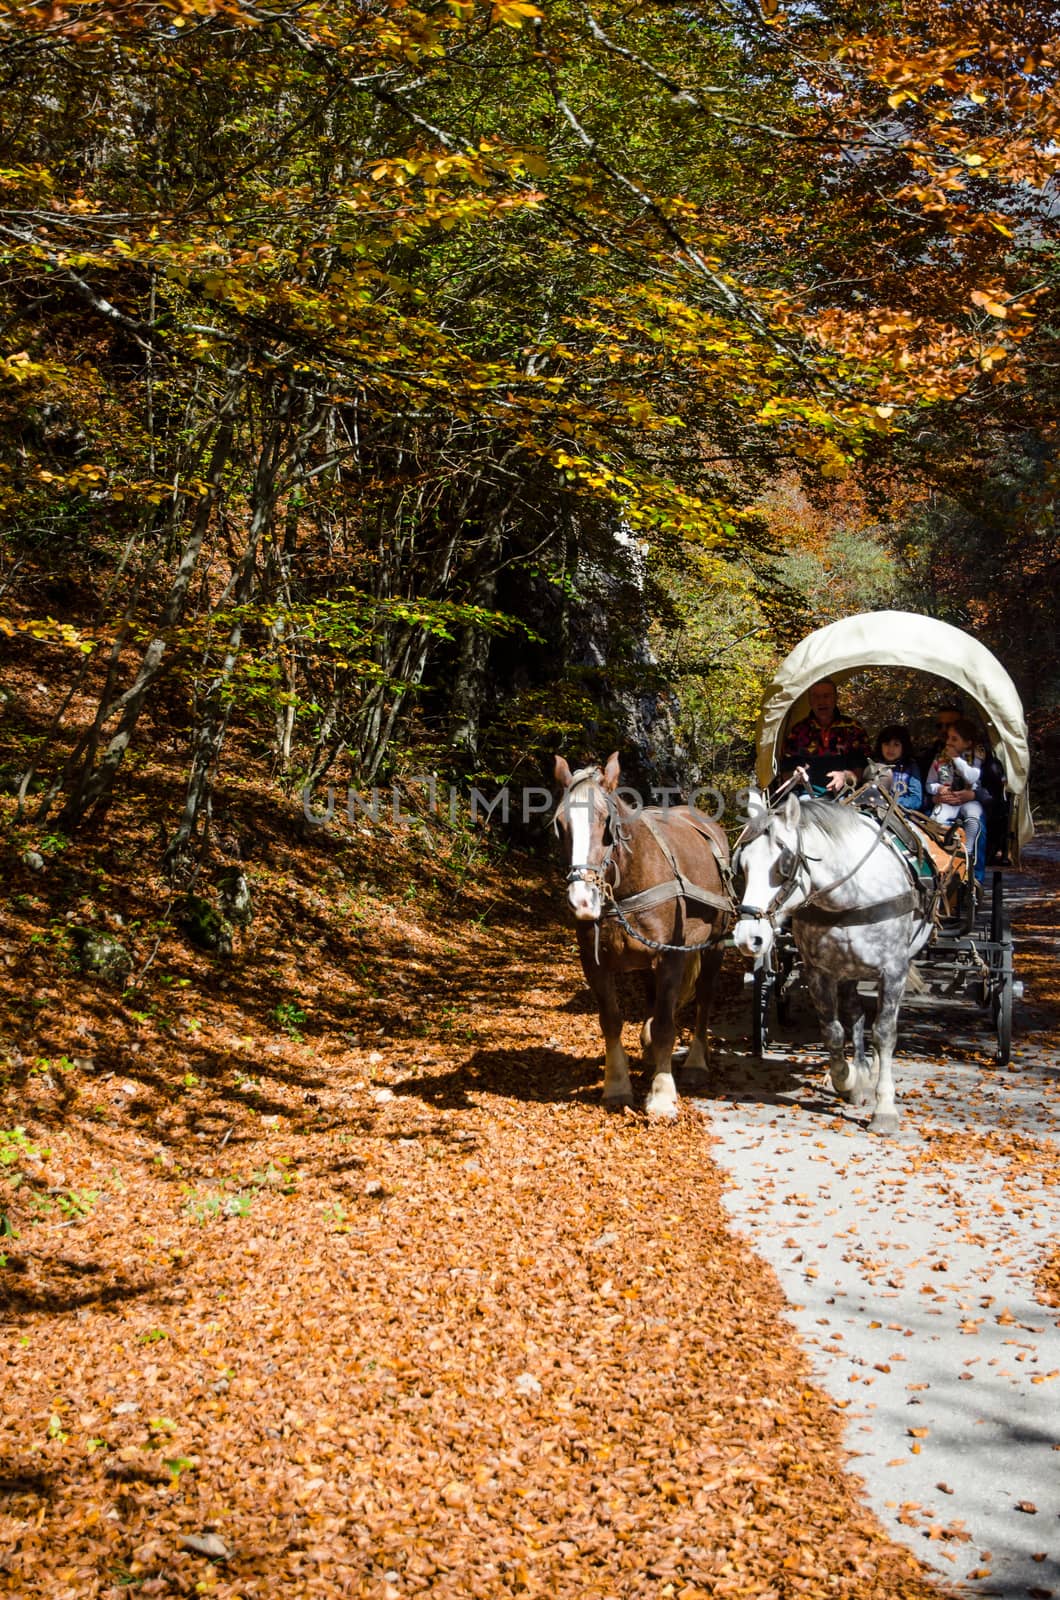 Abruzzo, Italy. October 2018. Autumn colors. Autumn colors and foliage. A family on a "conestoga" type wagon pulled by two horses passes through an avenue covered with fallen leaves and colorful trees